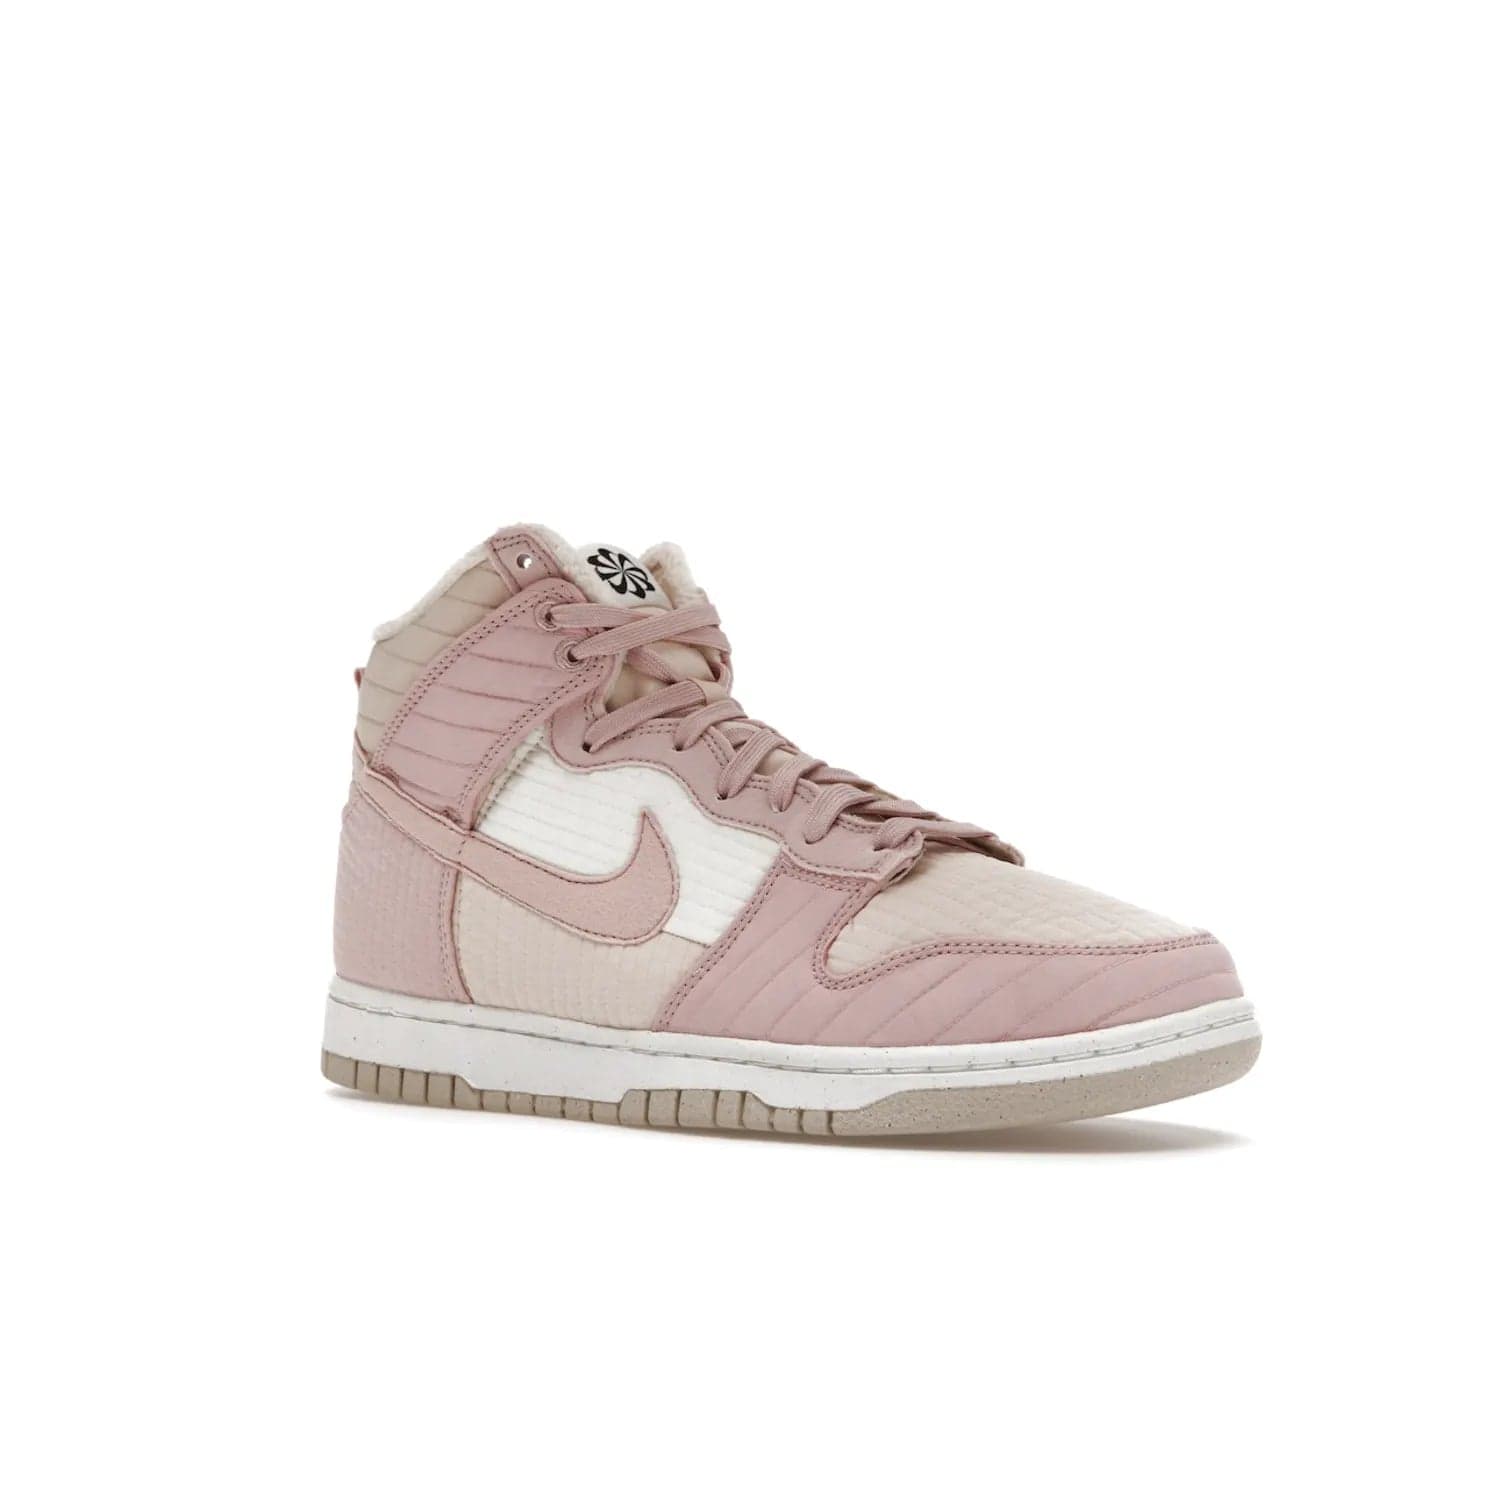 Nike Dunk High LX Next Nature Pink Oxford (Women's) - Image 5 - Only at www.BallersClubKickz.com - Cozy up in the Nike Dunk High LX Next Nature Pink Oxford for Women. Quilted upper, white midsole, soft fleece interior provide warmth and comfort for cold winter nights.